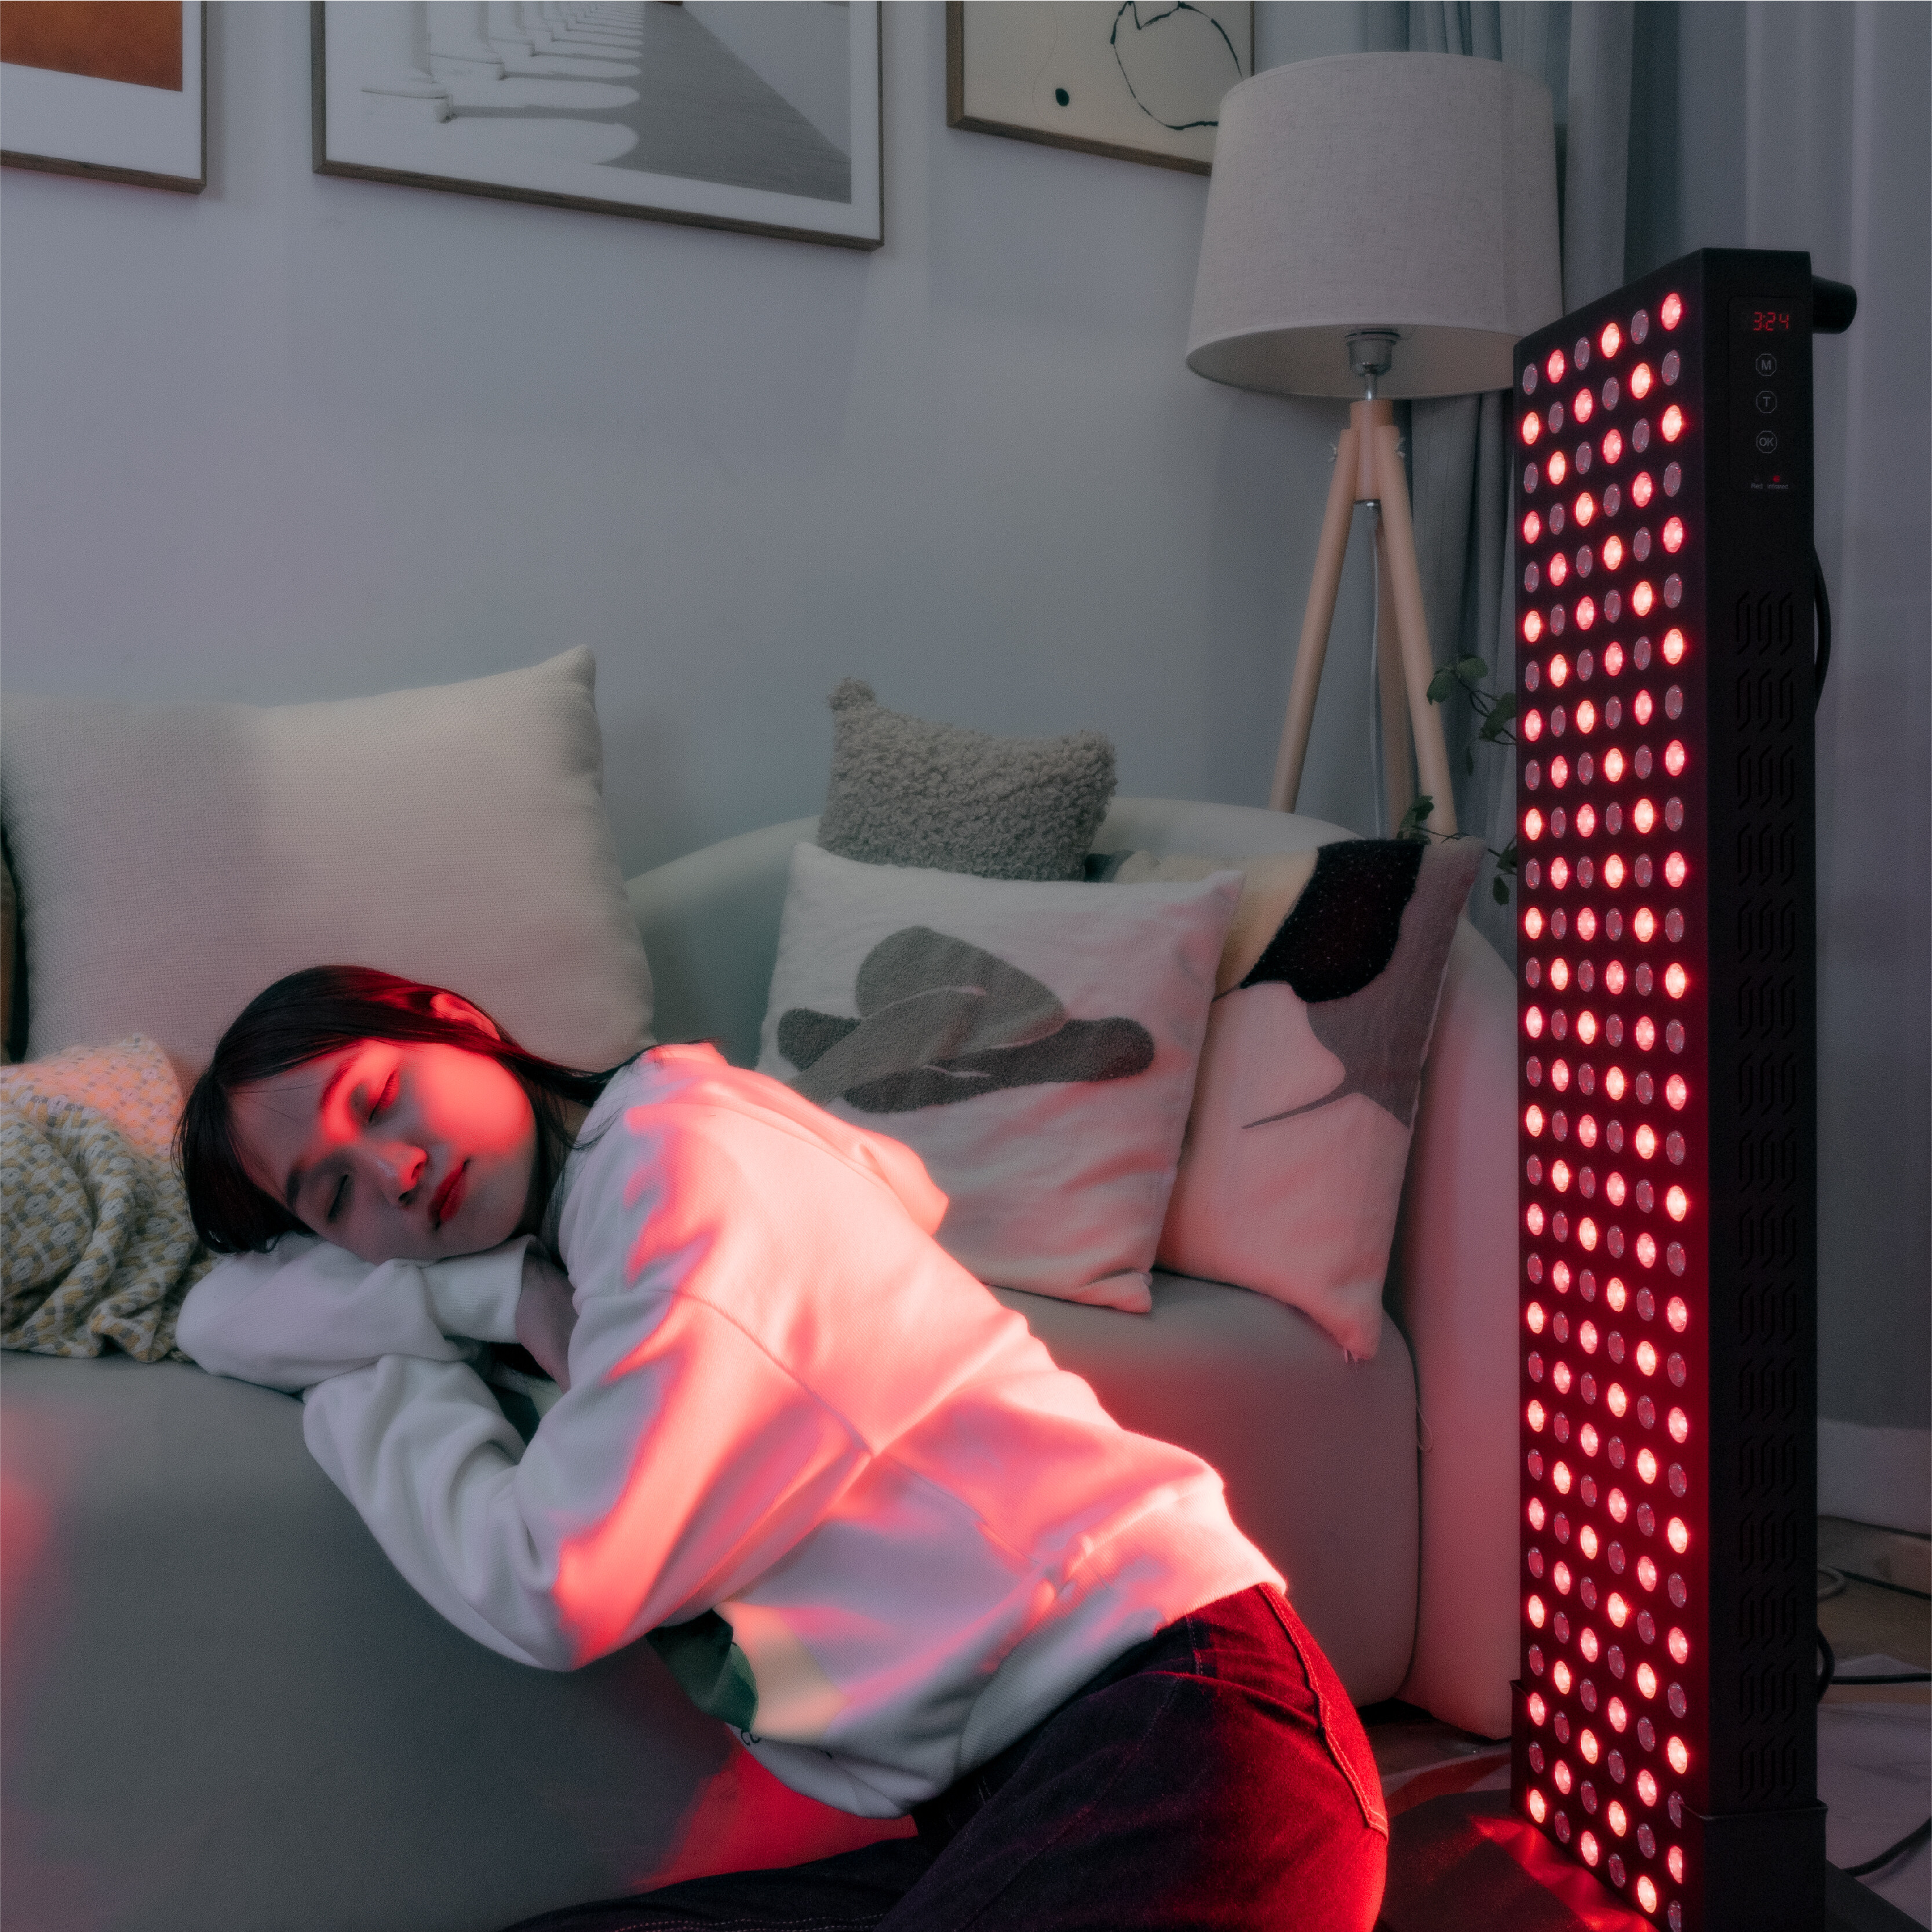 red light therapy adhd, red light treatment, red infrared light treatment, red led light skin treatment, red led light treatment, red light home treatment